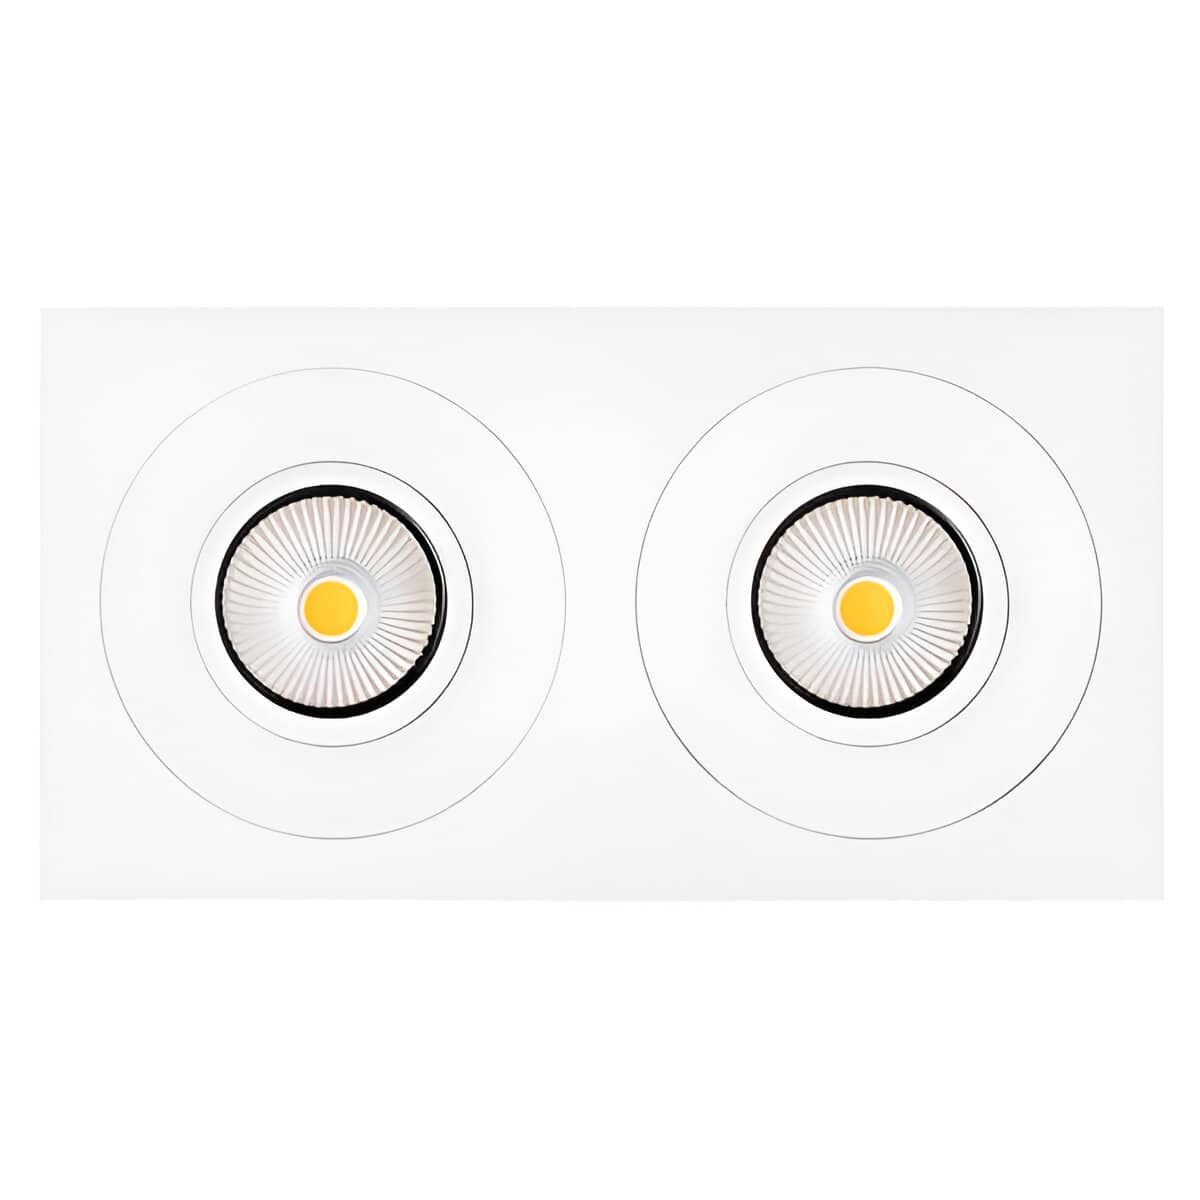 Product image of Zela twin white adapter plate with downlights inside